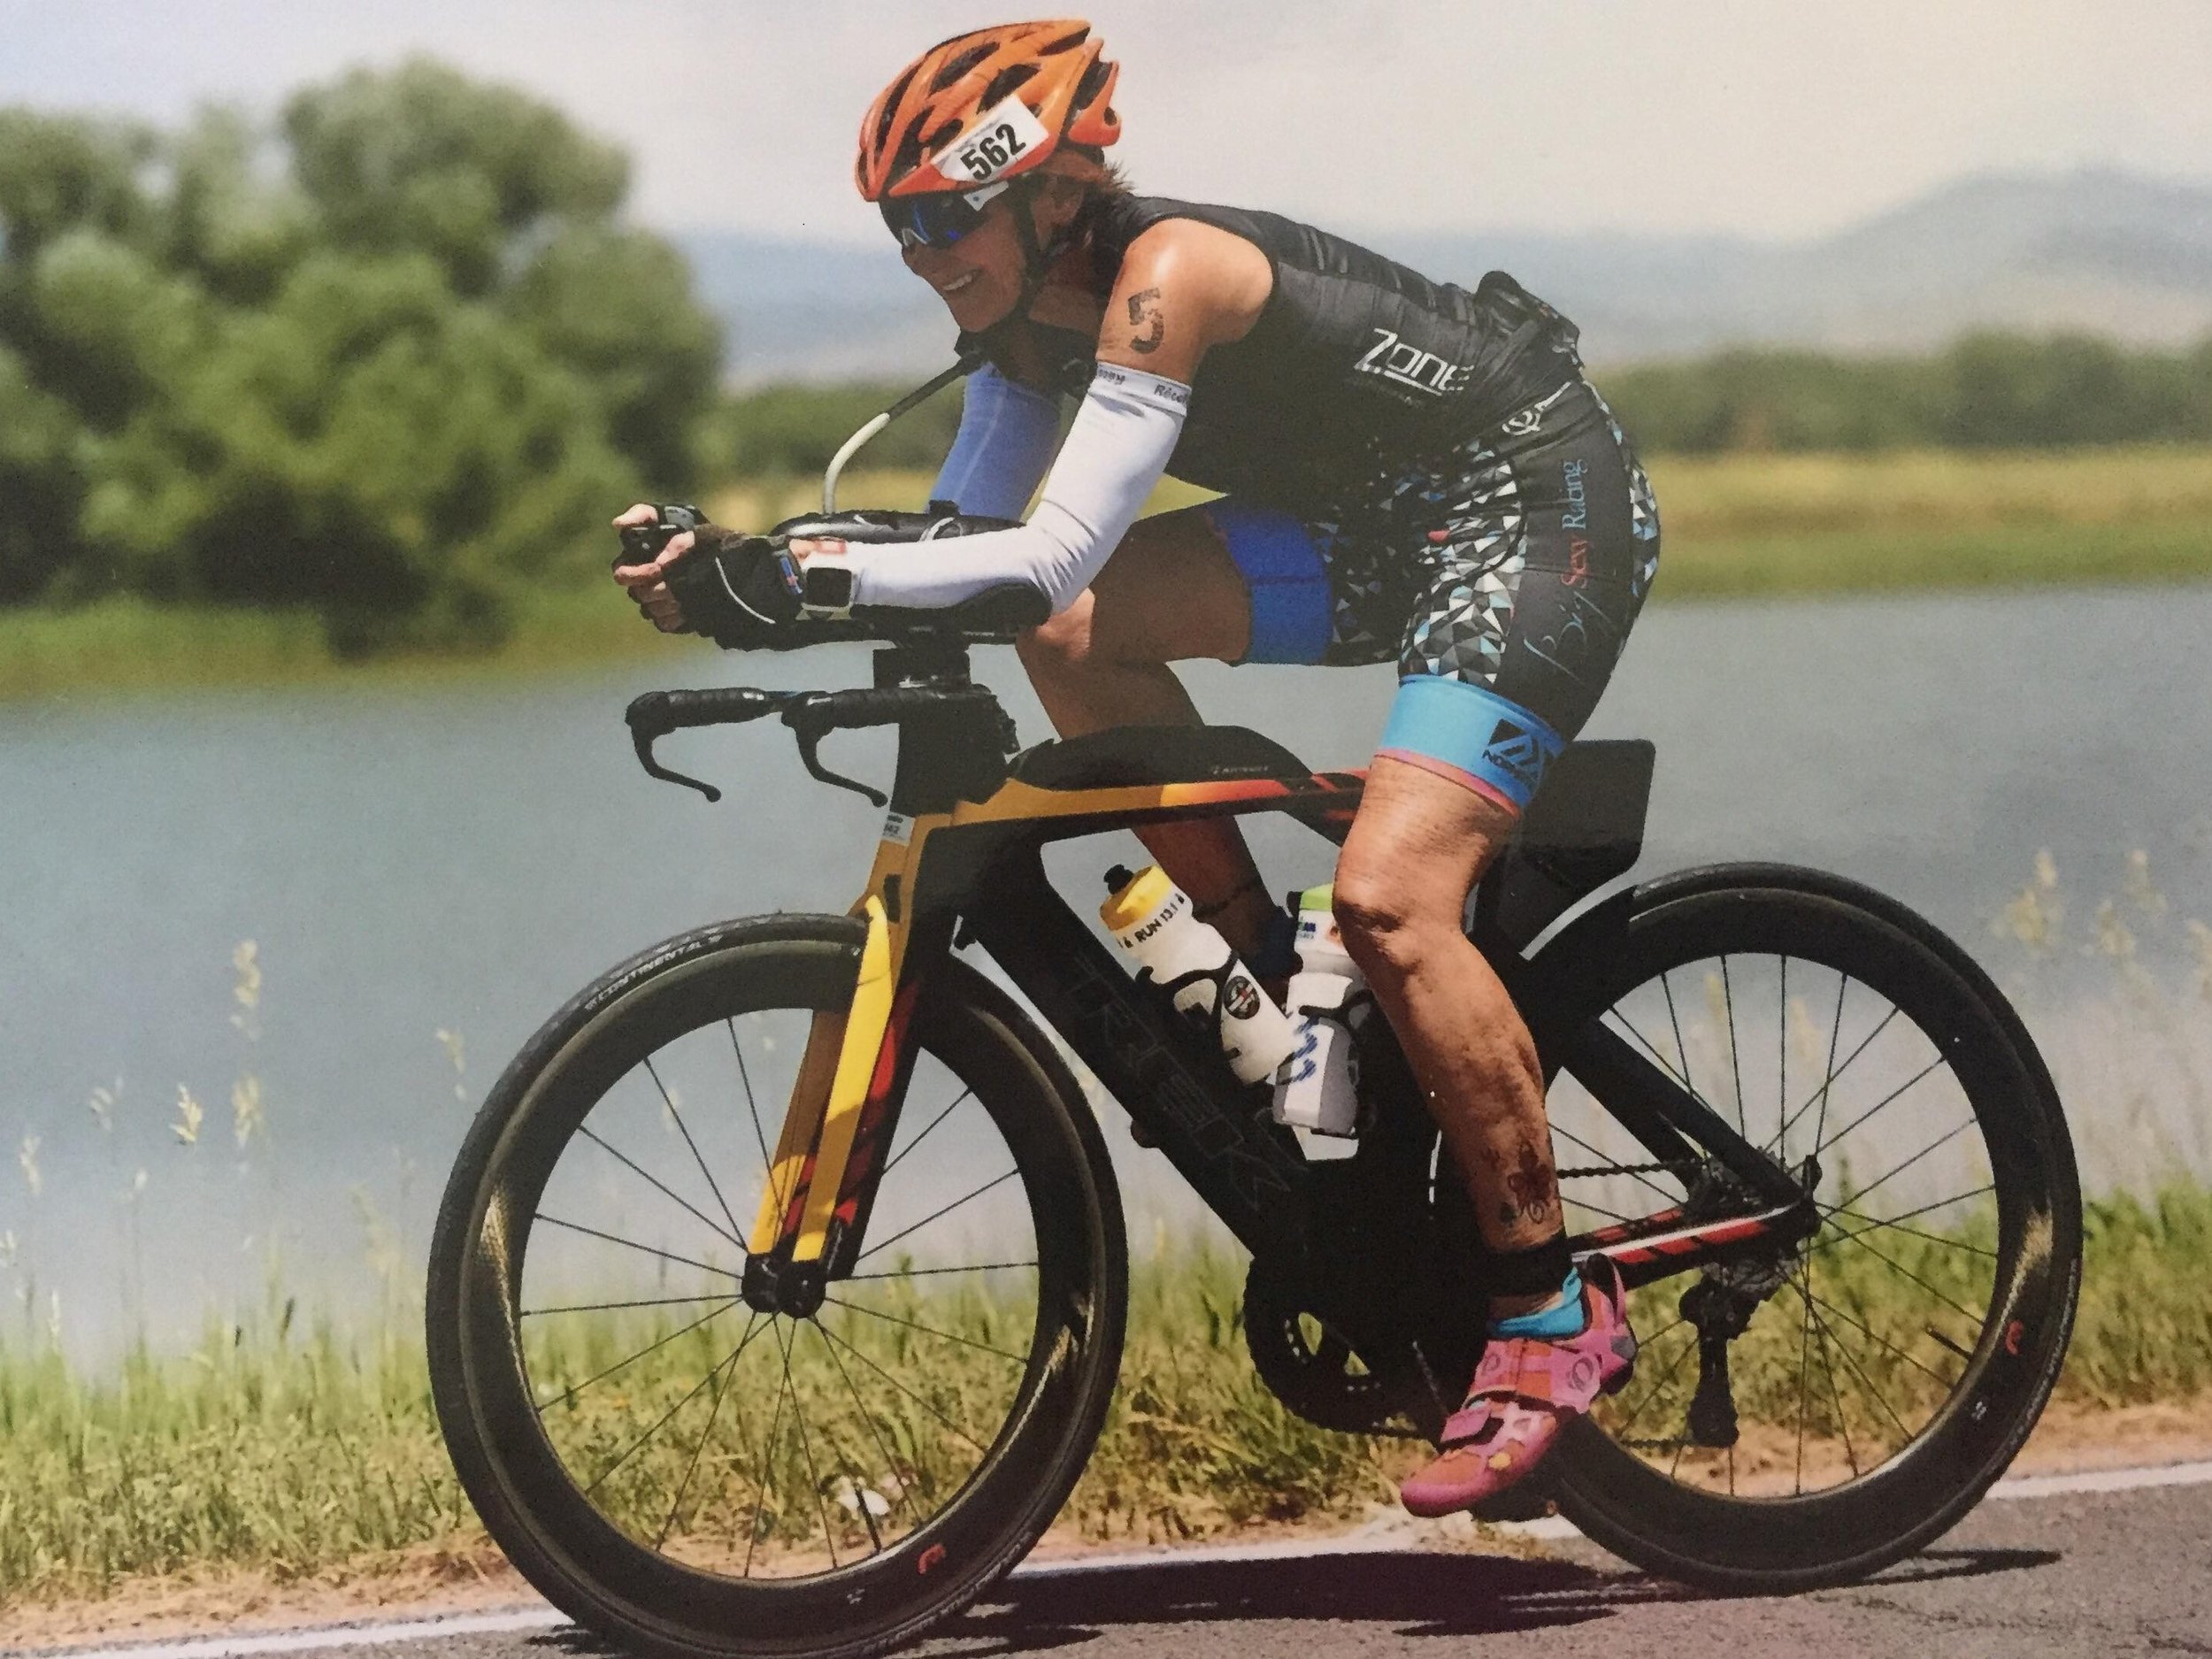 Coach_Terry_Wilson_Pursuit_of_The_Perfect_Race_IRONMAN_Boulder_DNF_Kitty_Cole_Bike_2.jpg